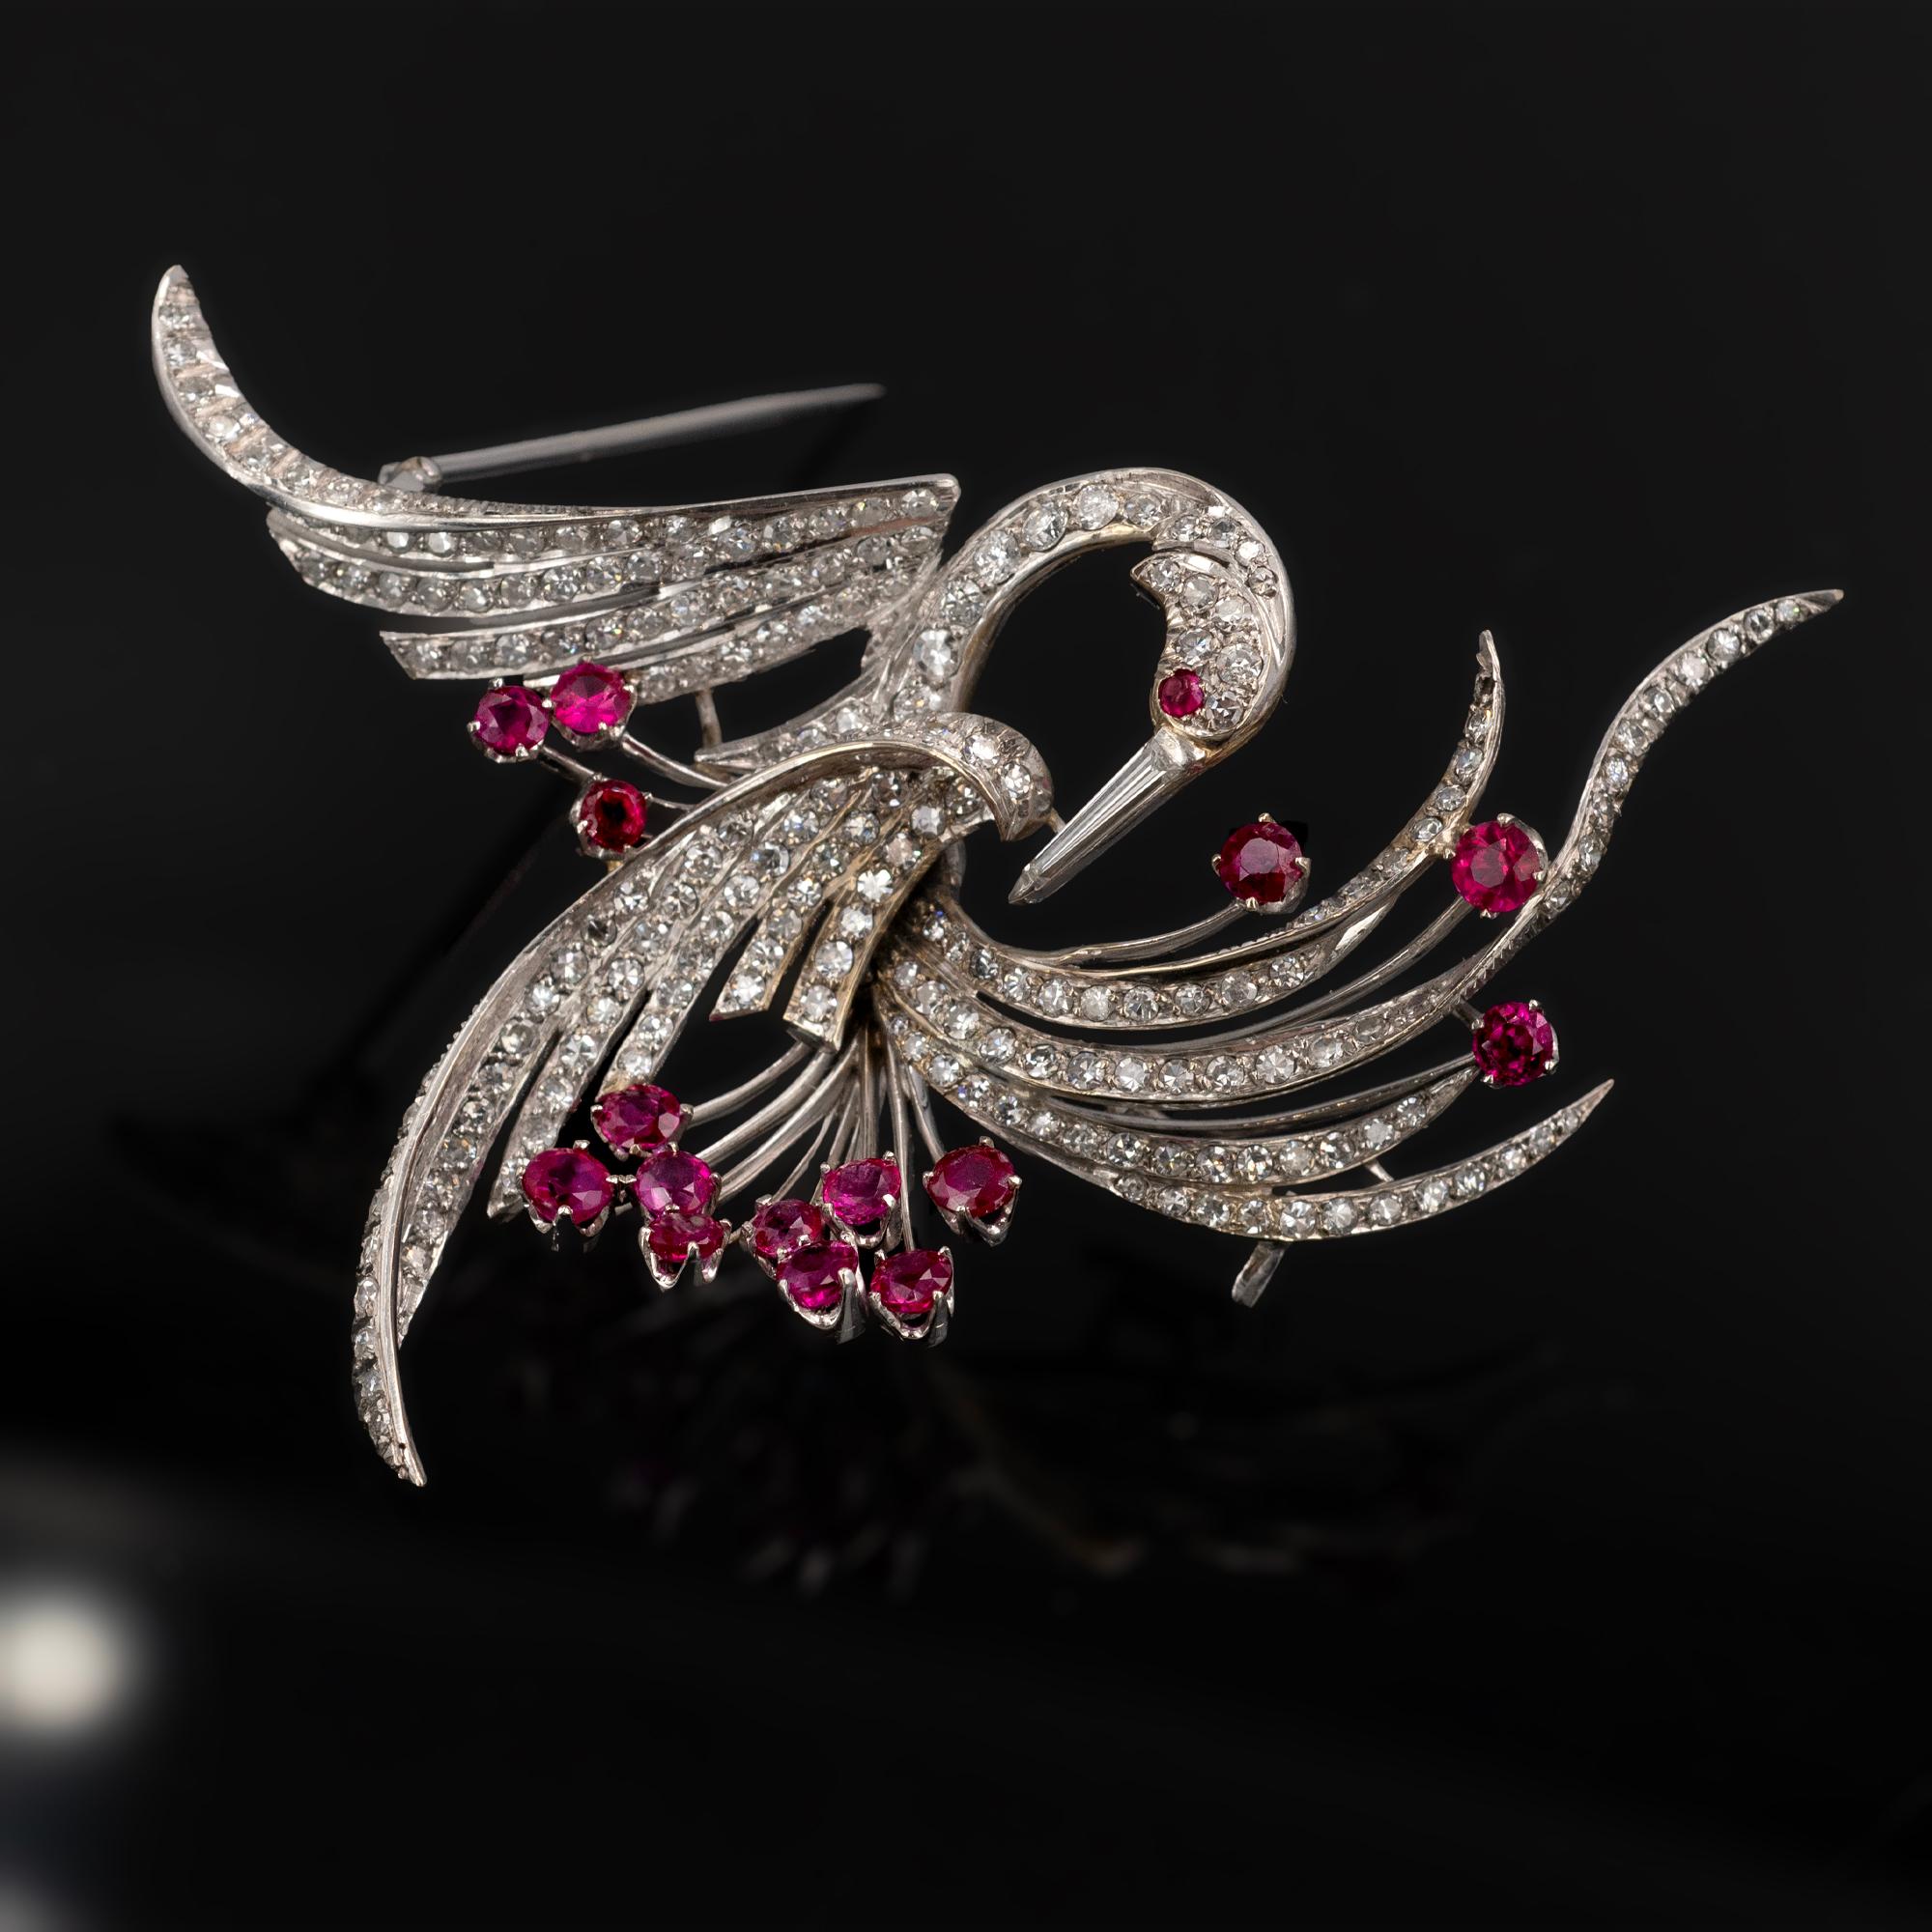 This brooch is a beautiful and timeless piece. It is crafted in white gold and measures 5 cm by 7 cm, making it the perfect size for any outfit. Designed to look like a stylized bird, the brooch is decorated with round pavé-set diamonds. These